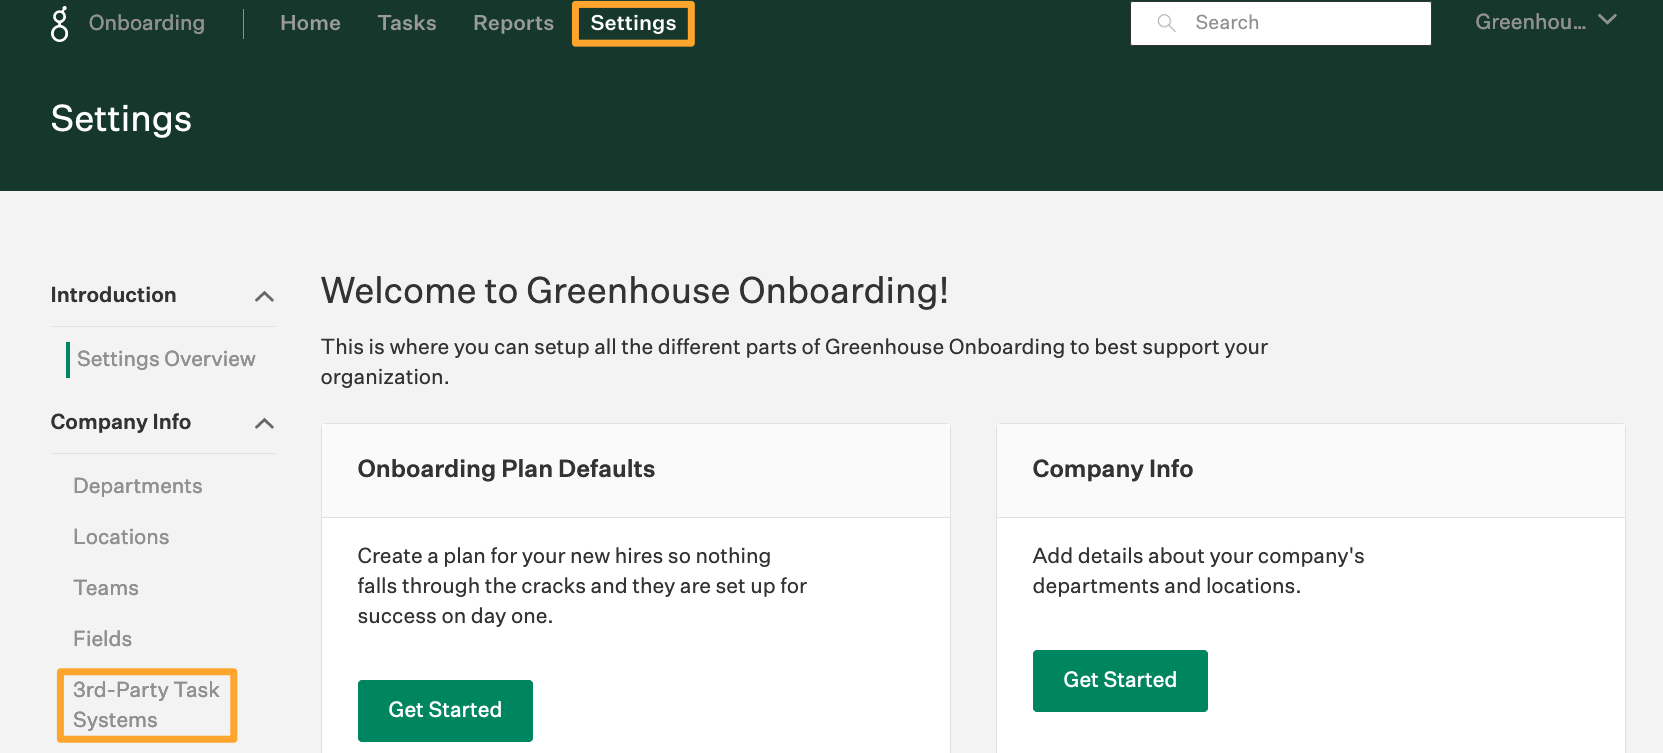 Greenhouse_Onboarding___Settings___3rd-Party_Task_Systems.png